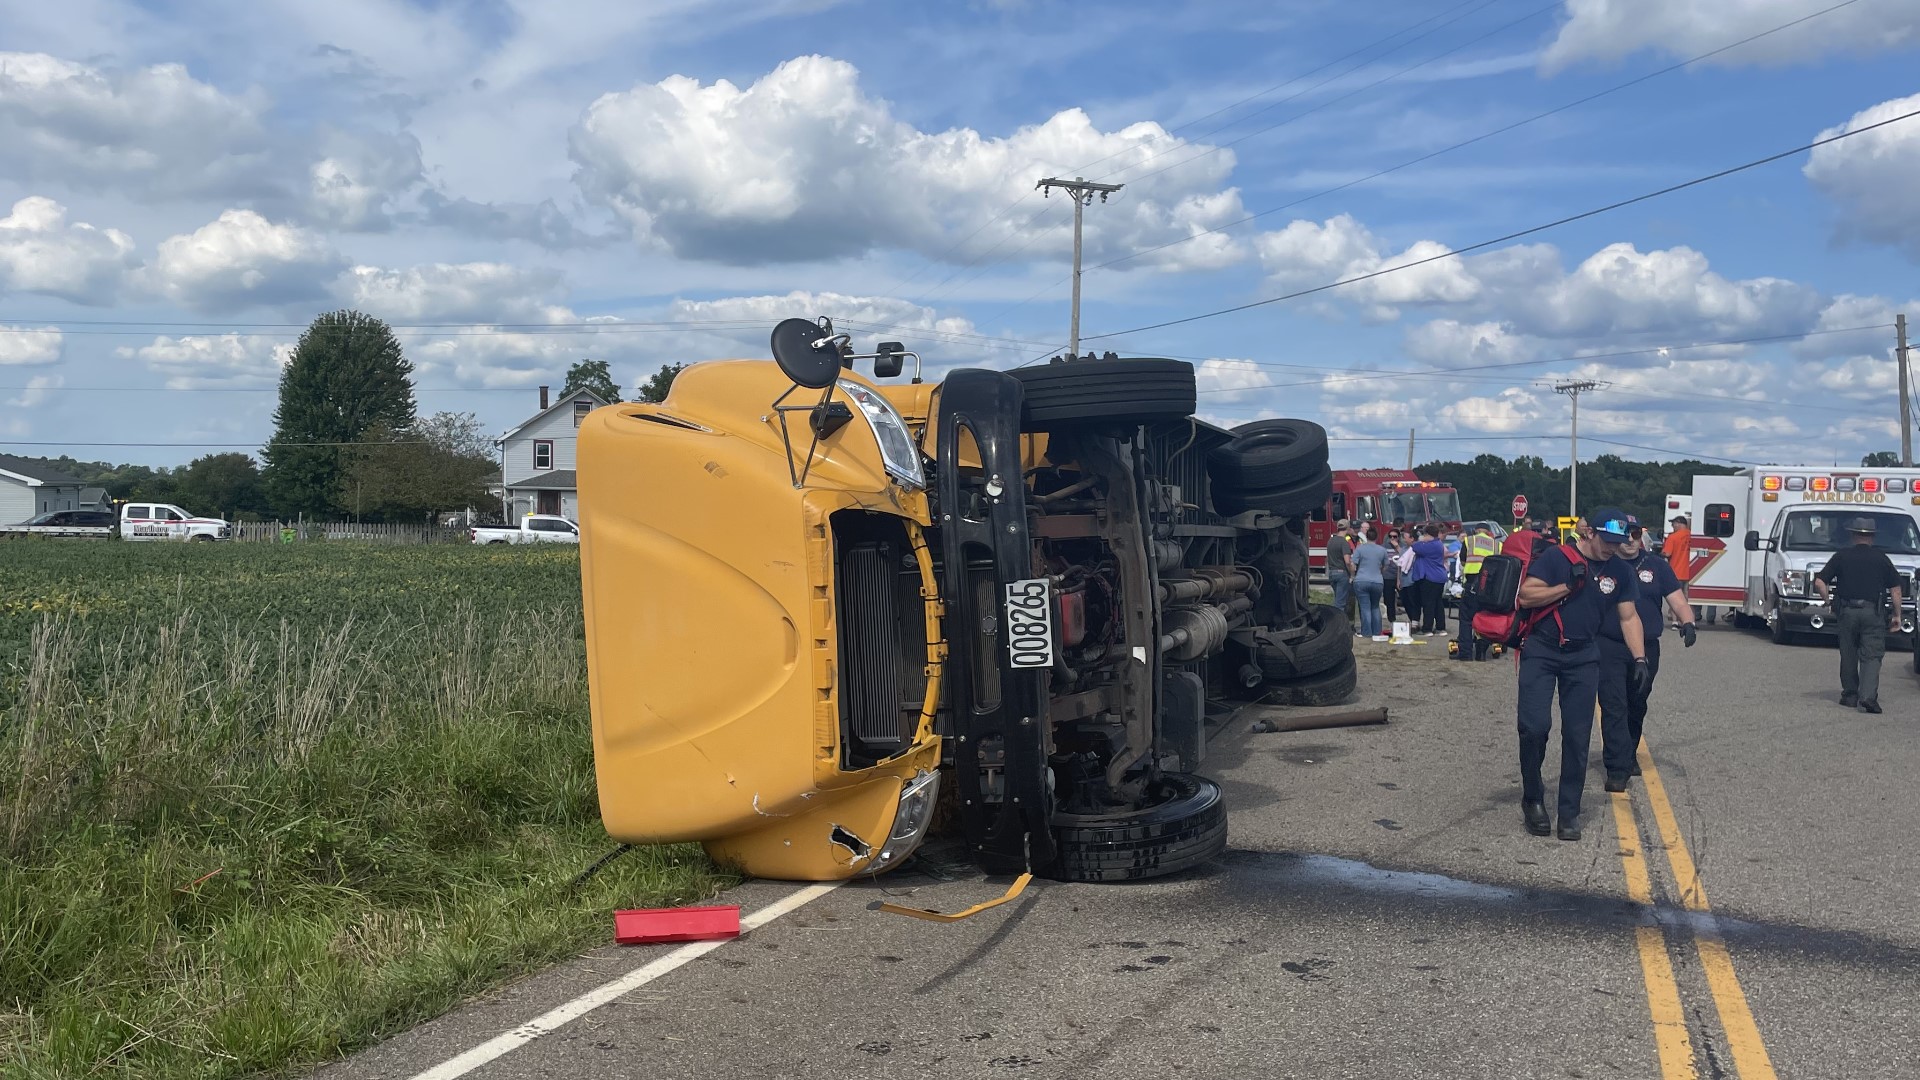 Six people were hospitalized after a Marlington Local Schools bus overturned on Monday. The driver, Debra Weisel, was cited for failure to control a motor vehicle.